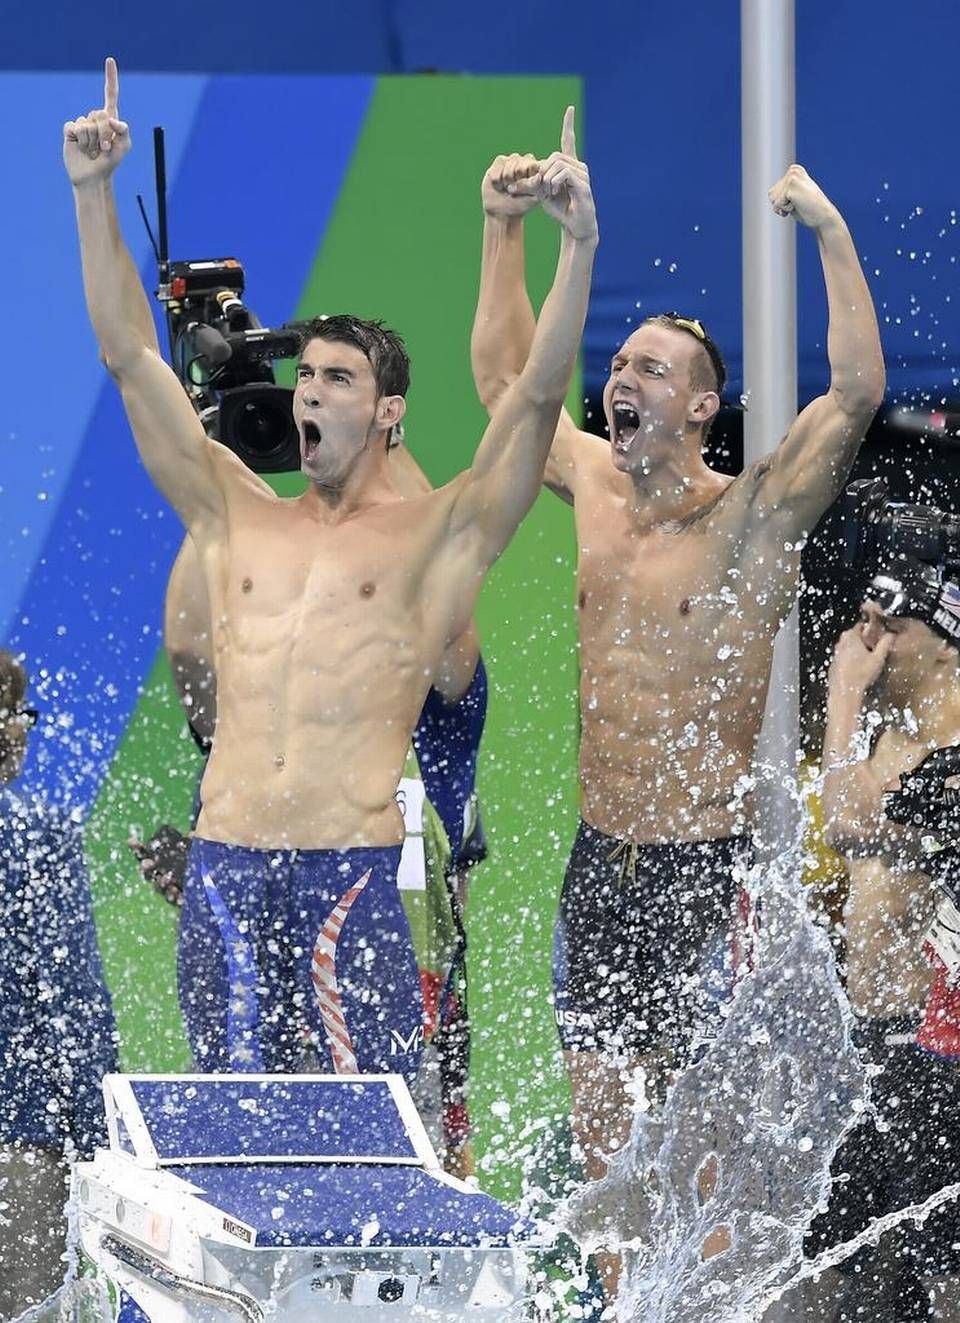 United States swimmers Michael Phelps, left, and Caeleb Dressel, right. Michael phelps, Caeleb dressel, Rio olympics